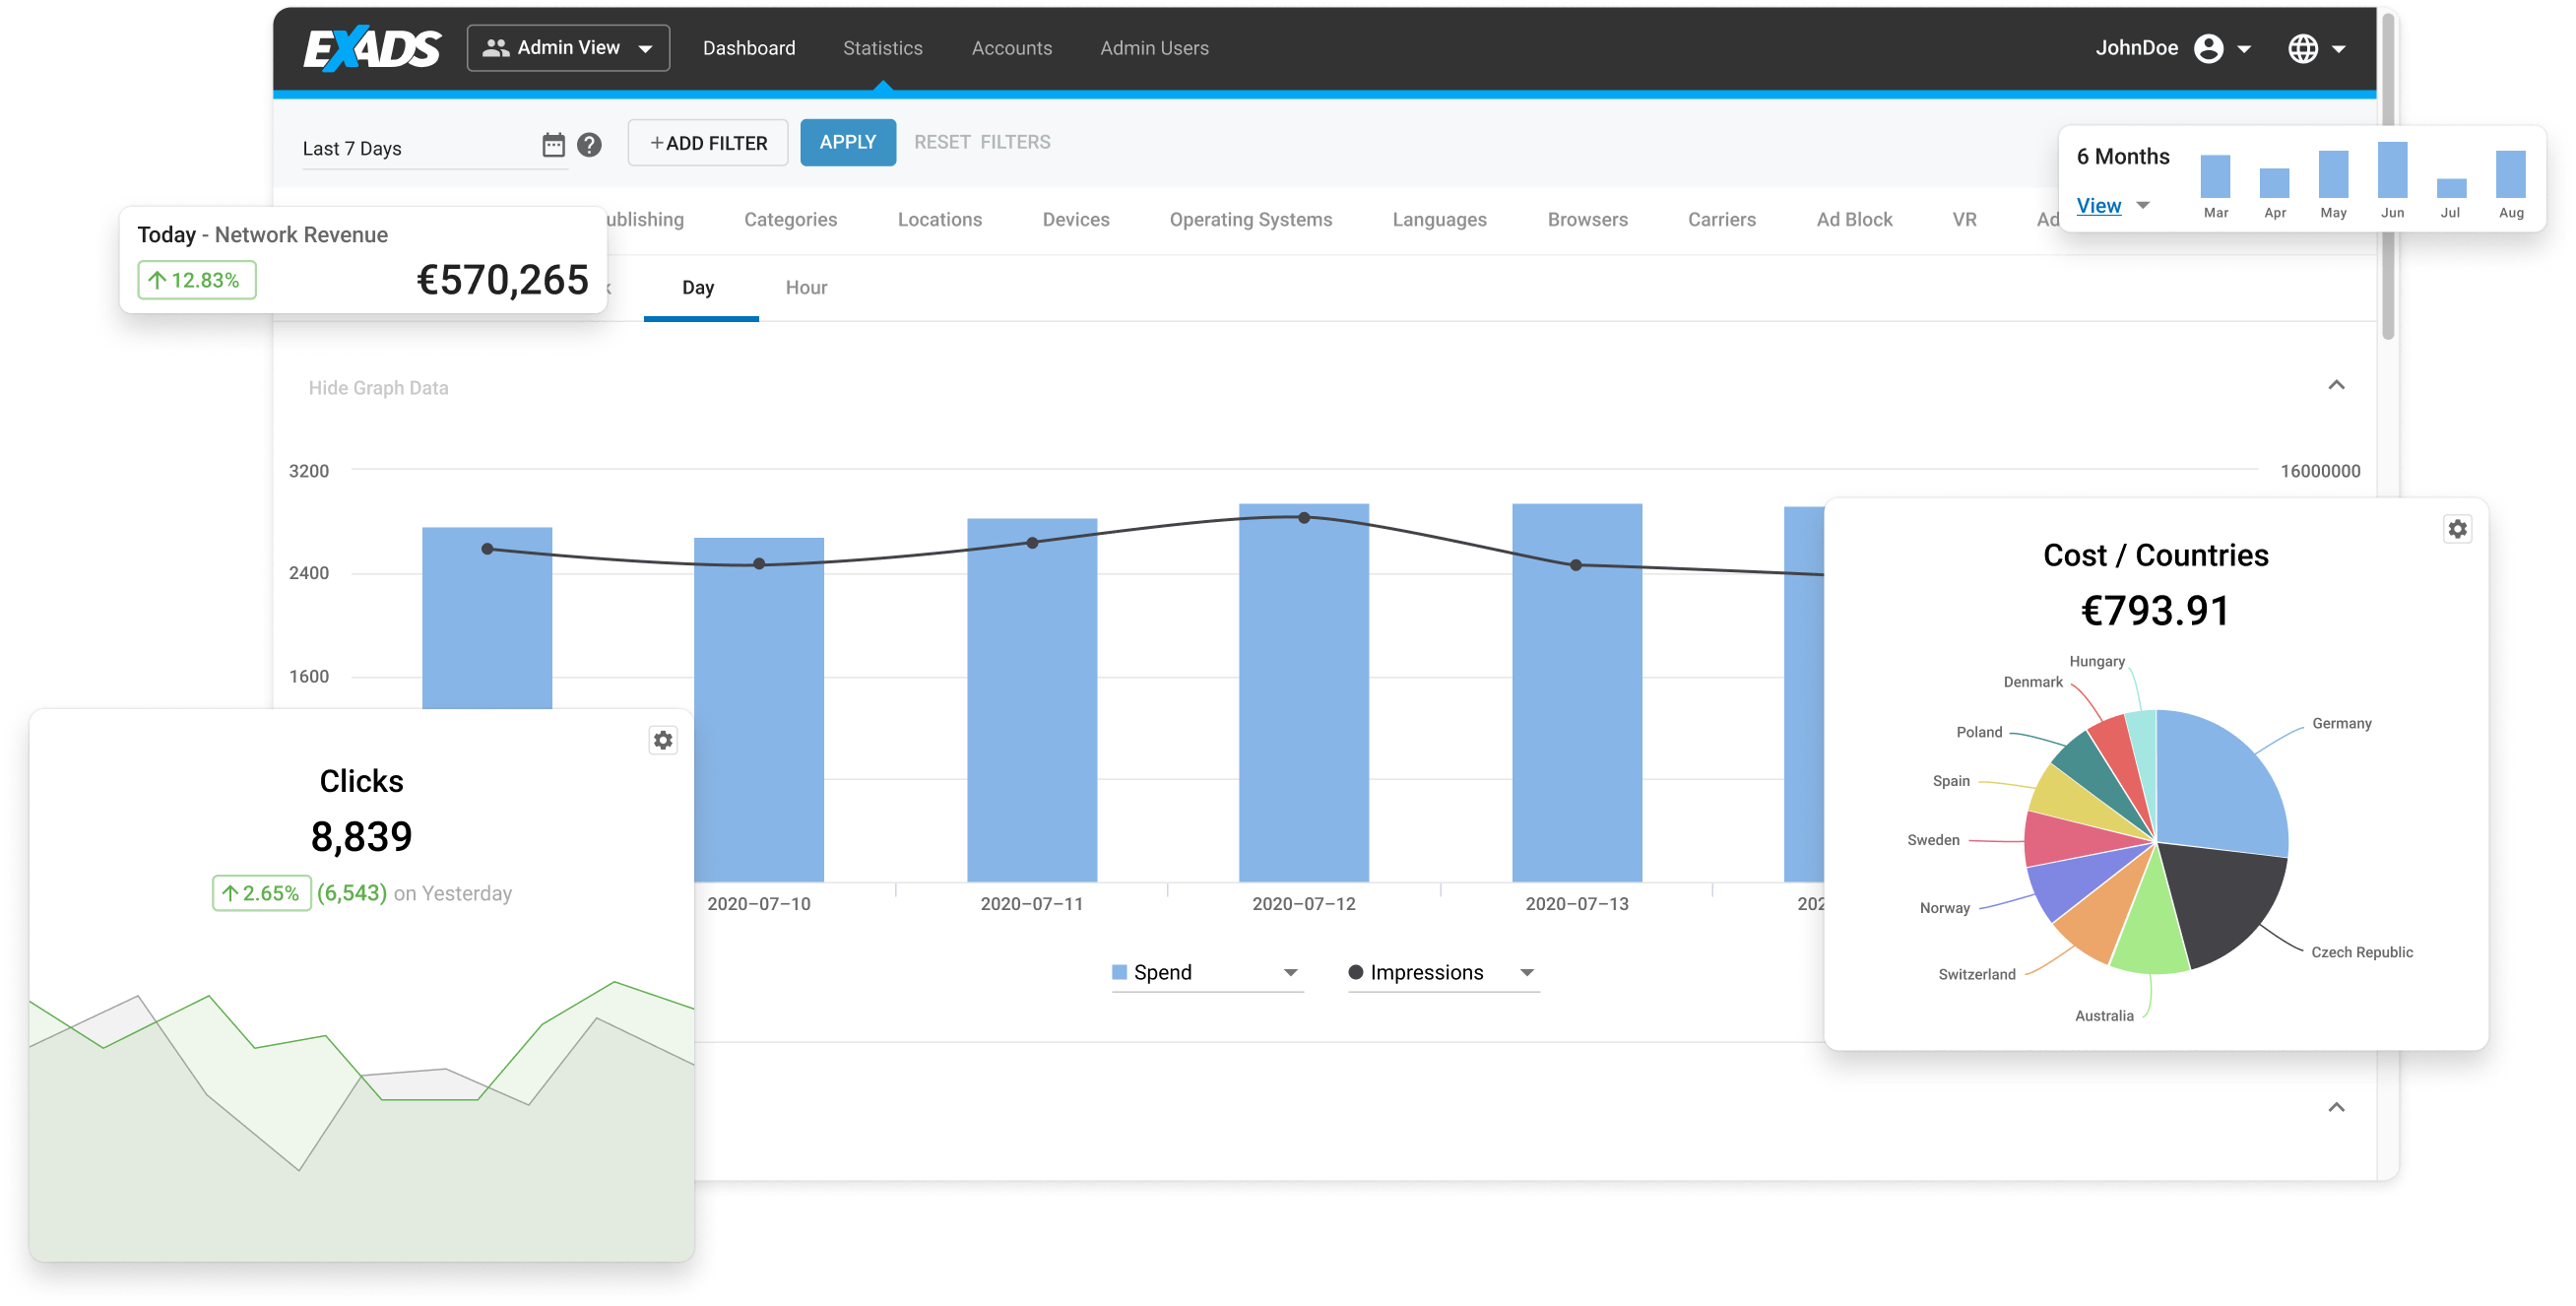 Our customizable dashboards give you real-time statistics to access ad serving data and examine client performance. Deep dive into statistics using multiple dimensions and metrics to maximize your advertising potential.